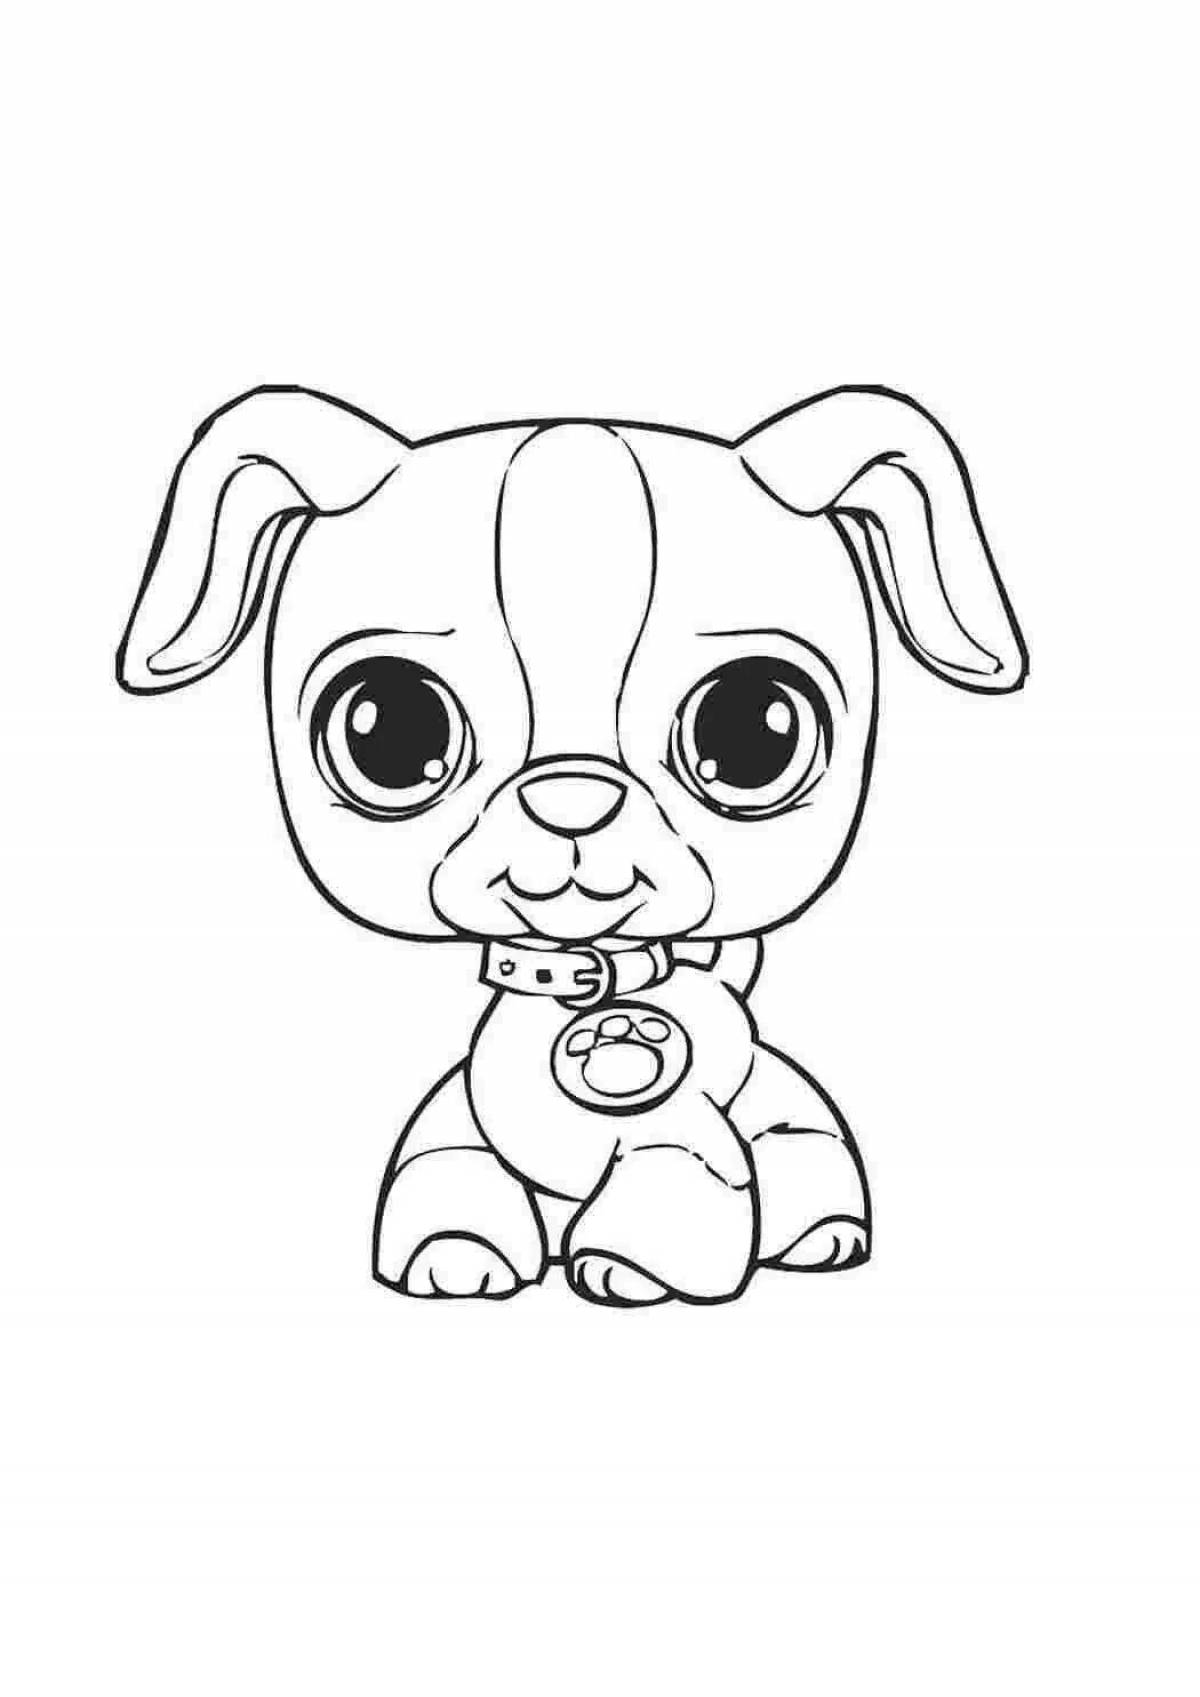 Live coloring pages of puppies for girls